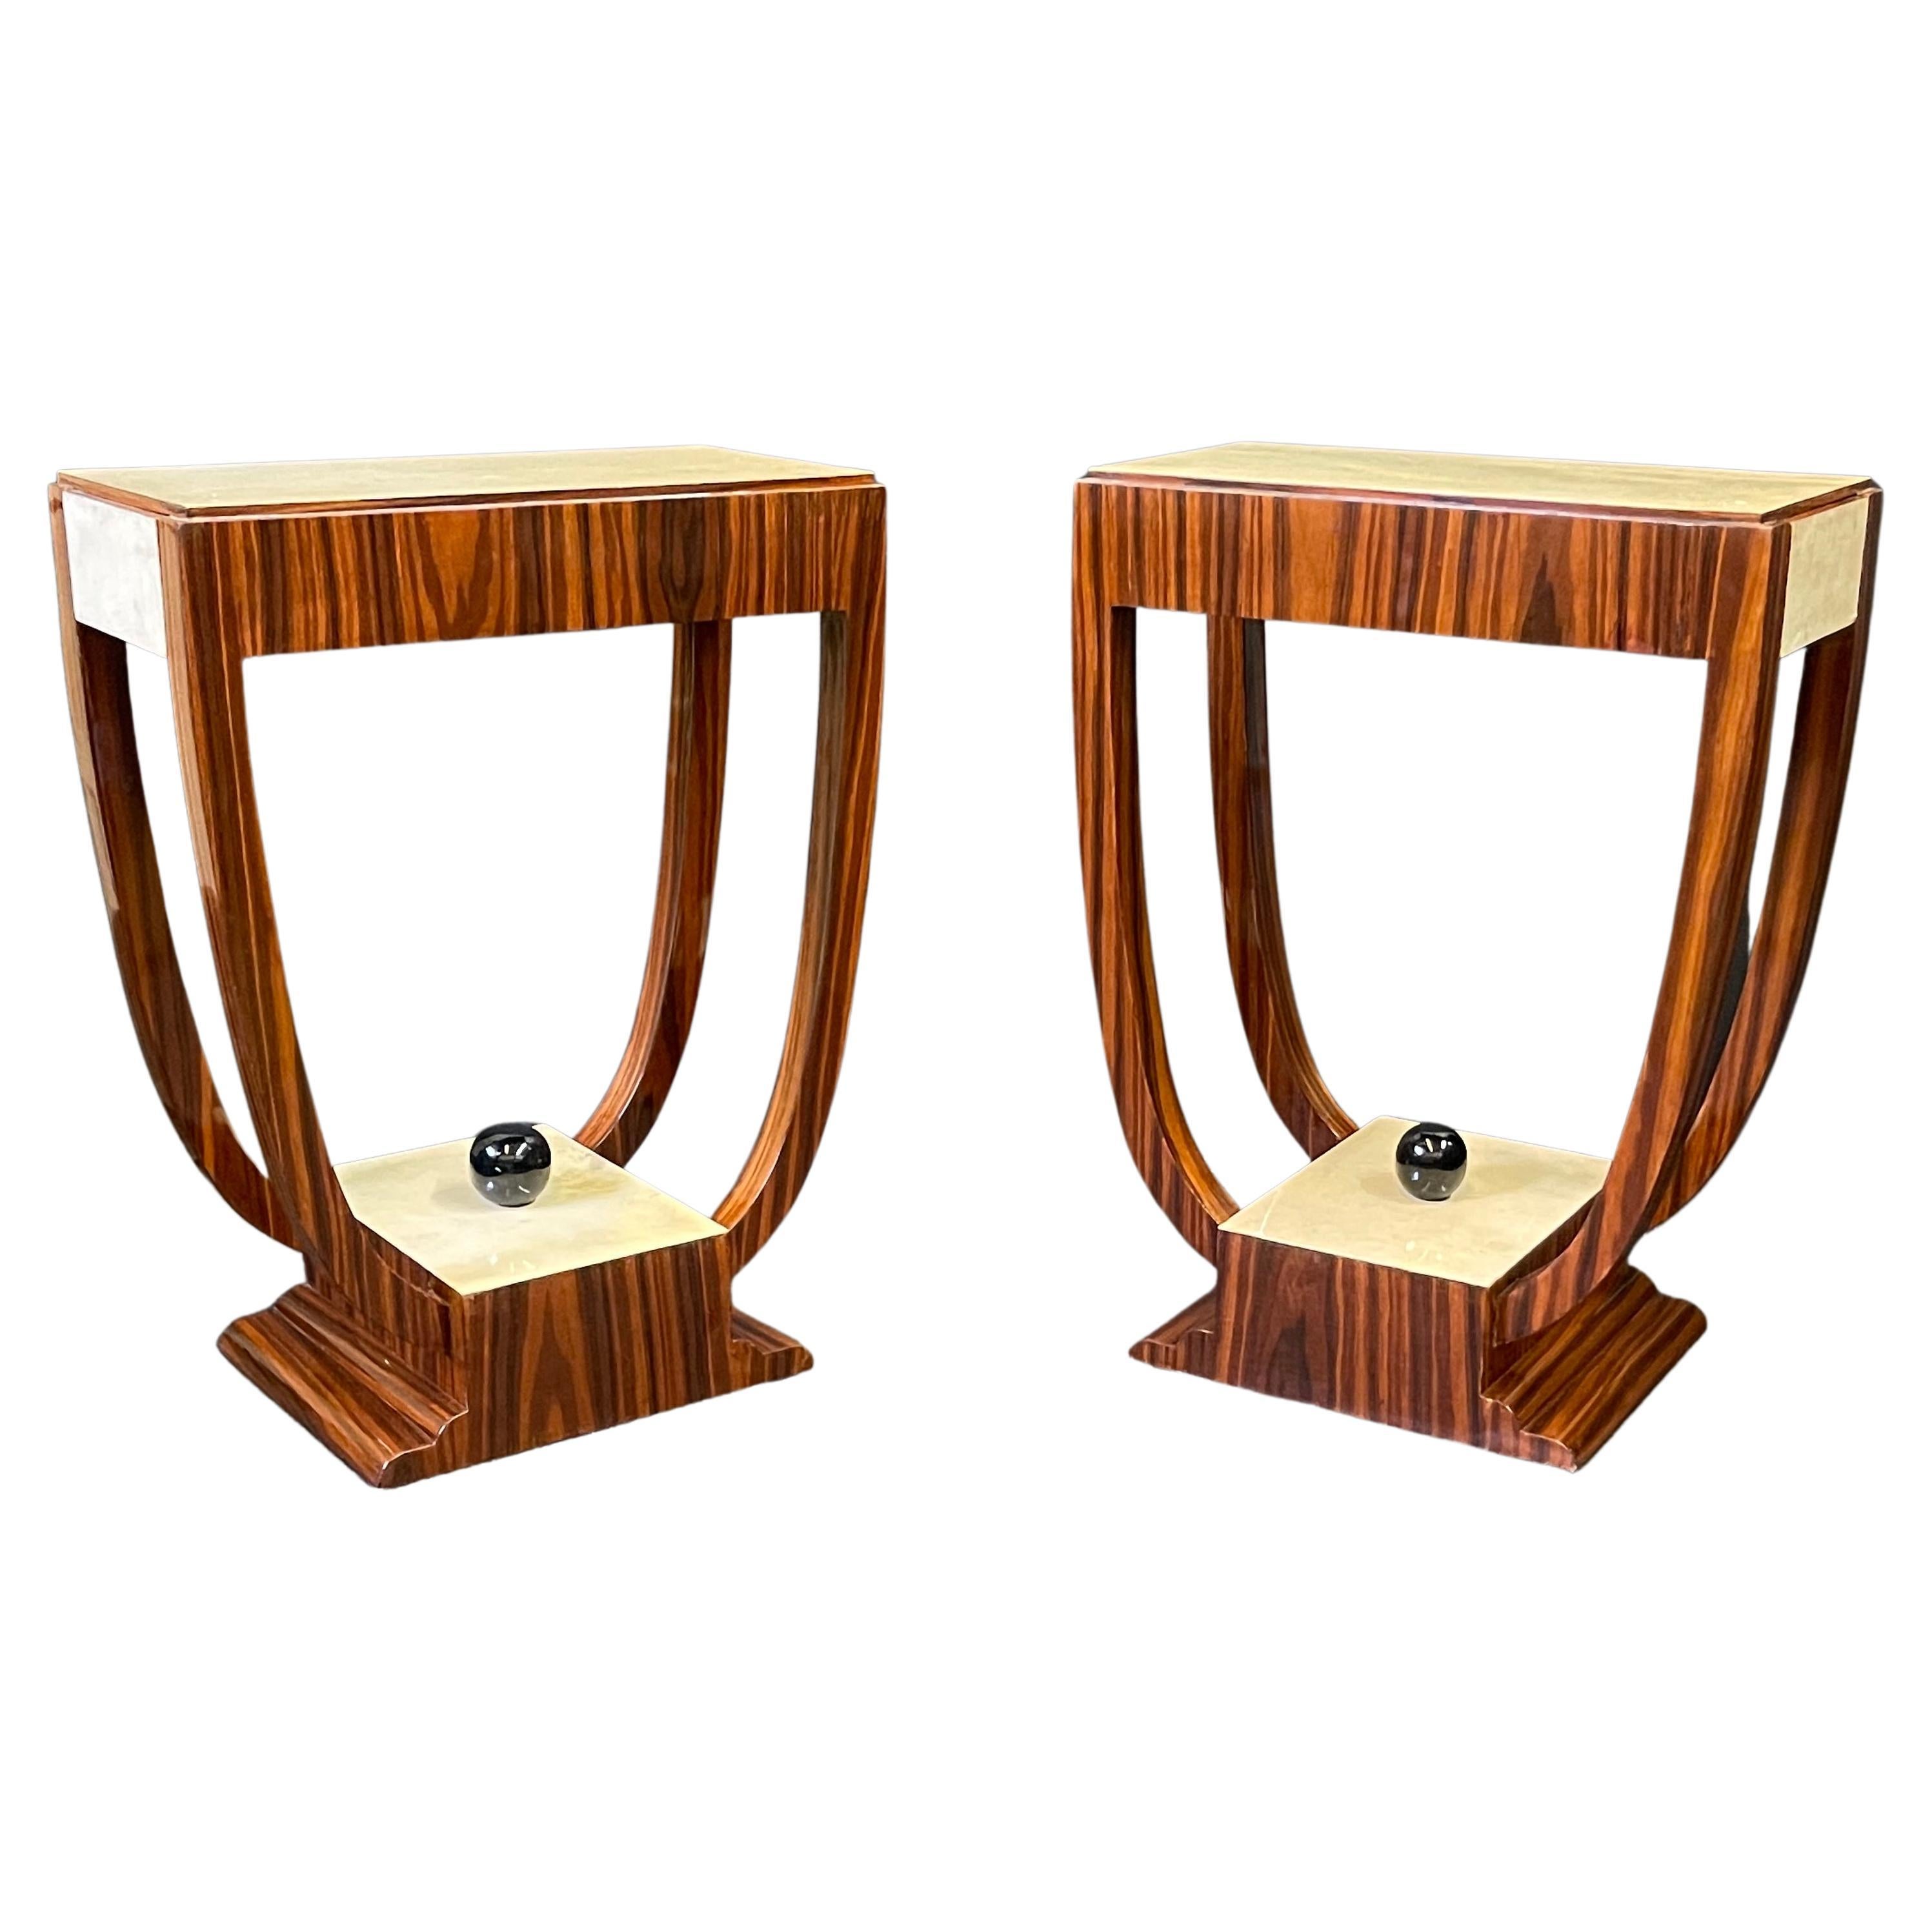 Pair of Art Deco Style Rosewood and Parchment Side Tables